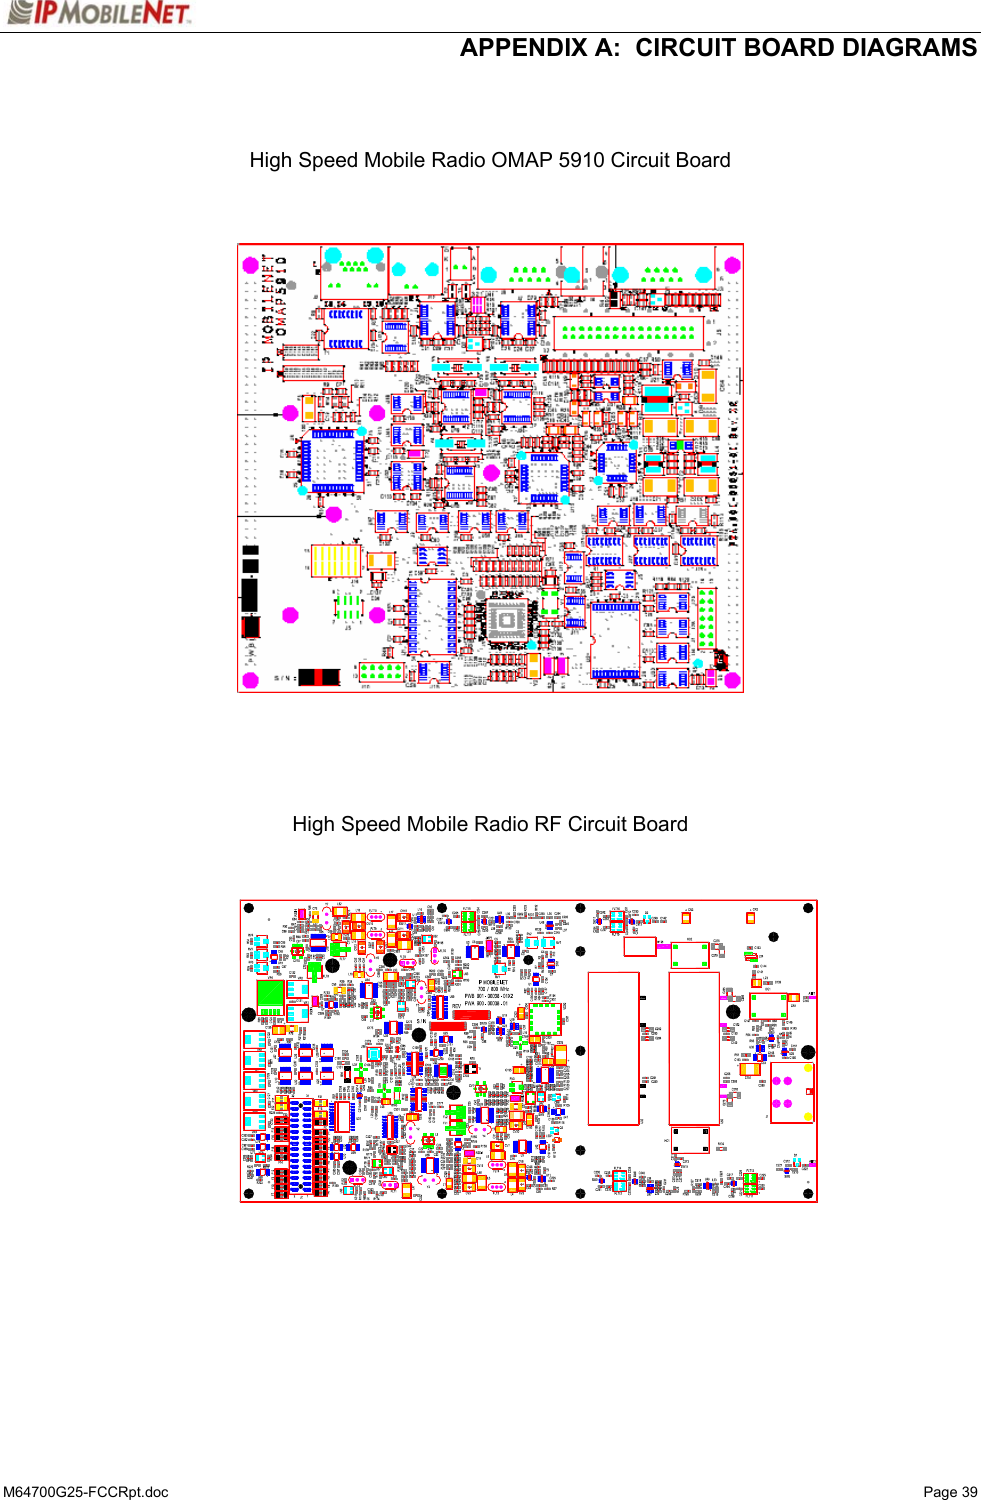  APPENDIX A:  CIRCUIT BOARD DIAGRAMS M64700G25-FCCRpt.doc   Page 39 ++++++++++   High Speed Mobile Radio OMAP 5910 Circuit Board          High Speed Mobile Radio RF Circuit Board                   